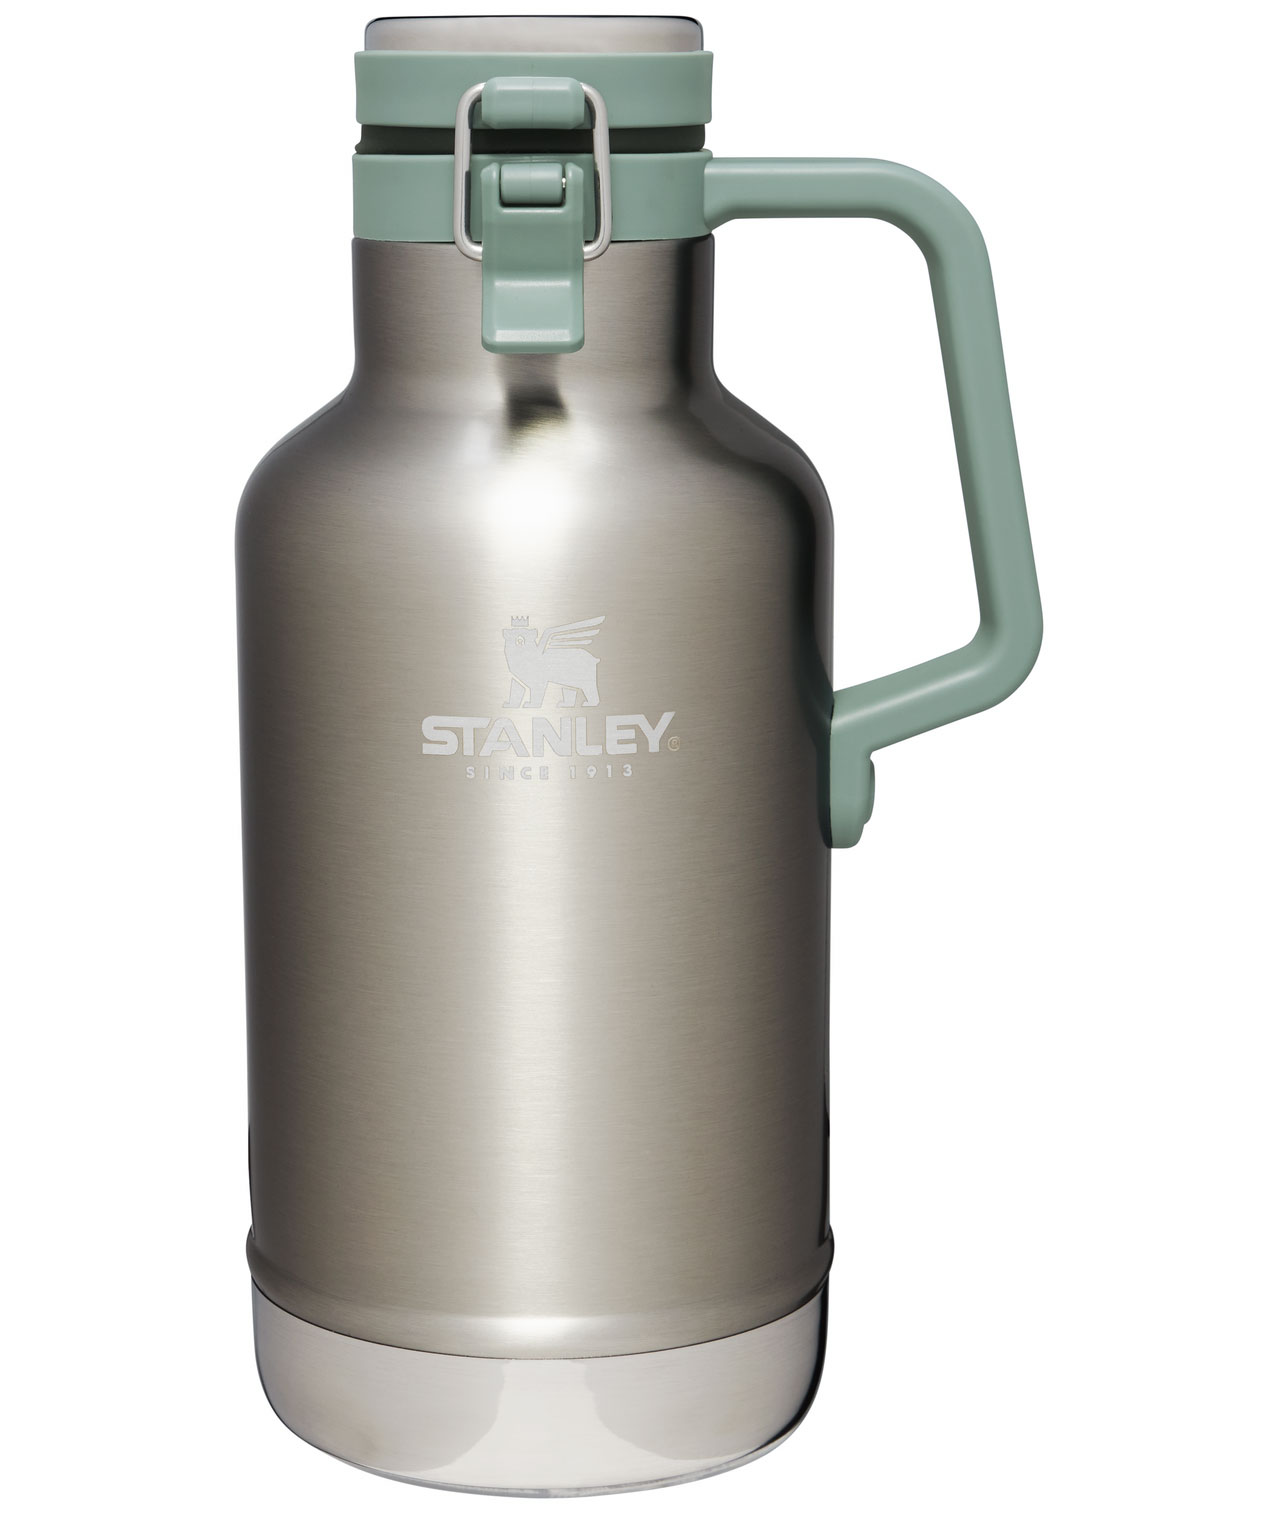 https://op2.0ps.us/original/opplanet-stanley-the-easy-pour-growler-64oz-stainless-steel-64-oz-10-01941-158-main